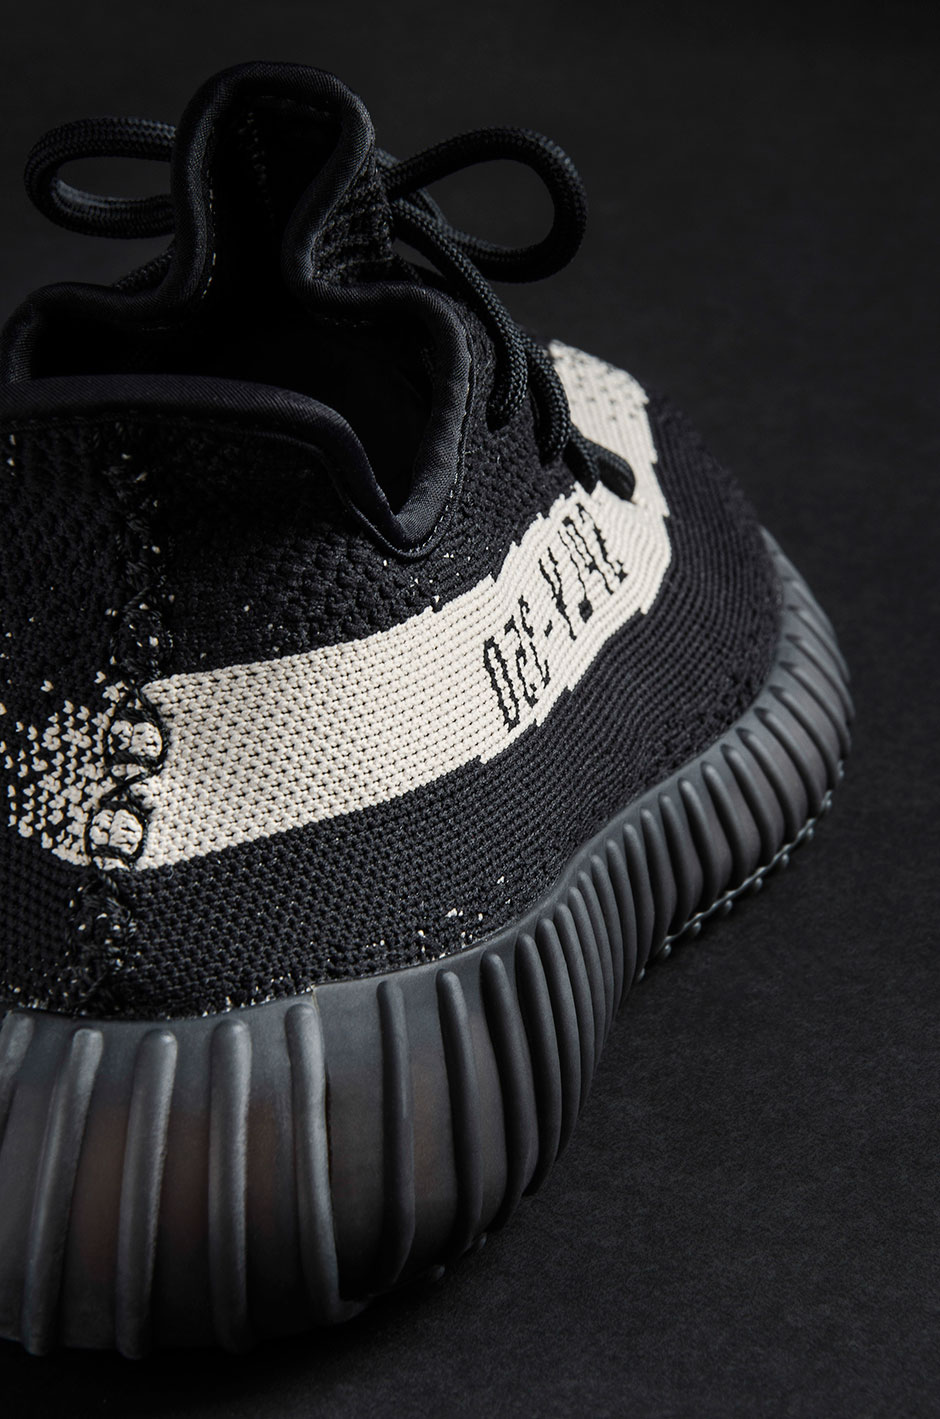 Yeezy Boost 350 V2 Black White Release Date